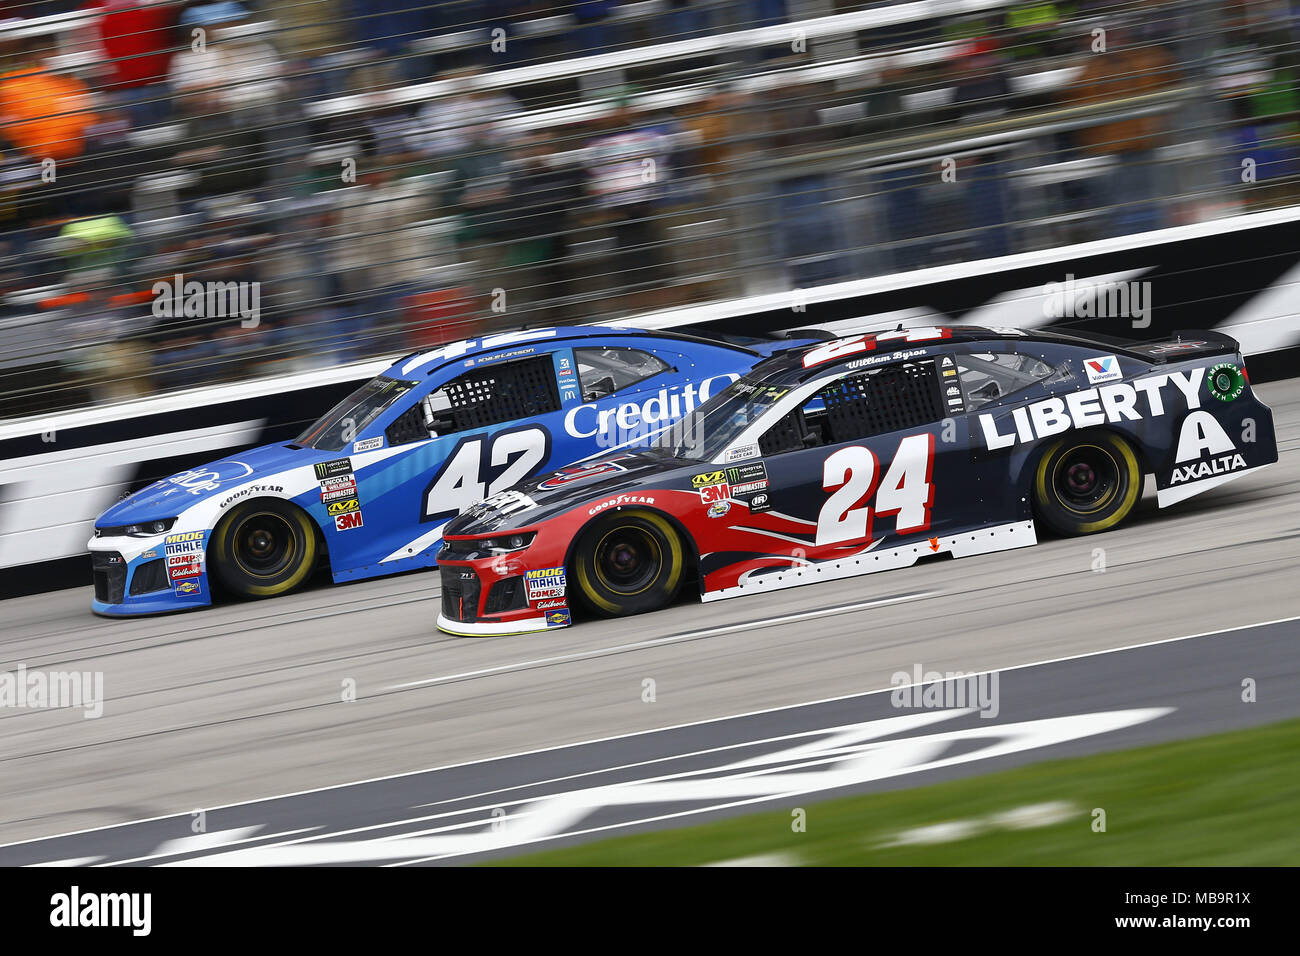 Ft. Worth, Texas, USA. 8th Apr, 2018. April 08, 2018 - Ft. Worth, Texas, USA: Kyle Larson (42) and William Byron (24) battle for position during the O'Reilly Auto Parts 500 at Texas Motor Speedway in Ft. Worth, Texas. Credit: Chris Owens Asp Inc/ASP/ZUMA Wire/Alamy Live News Stock Photo